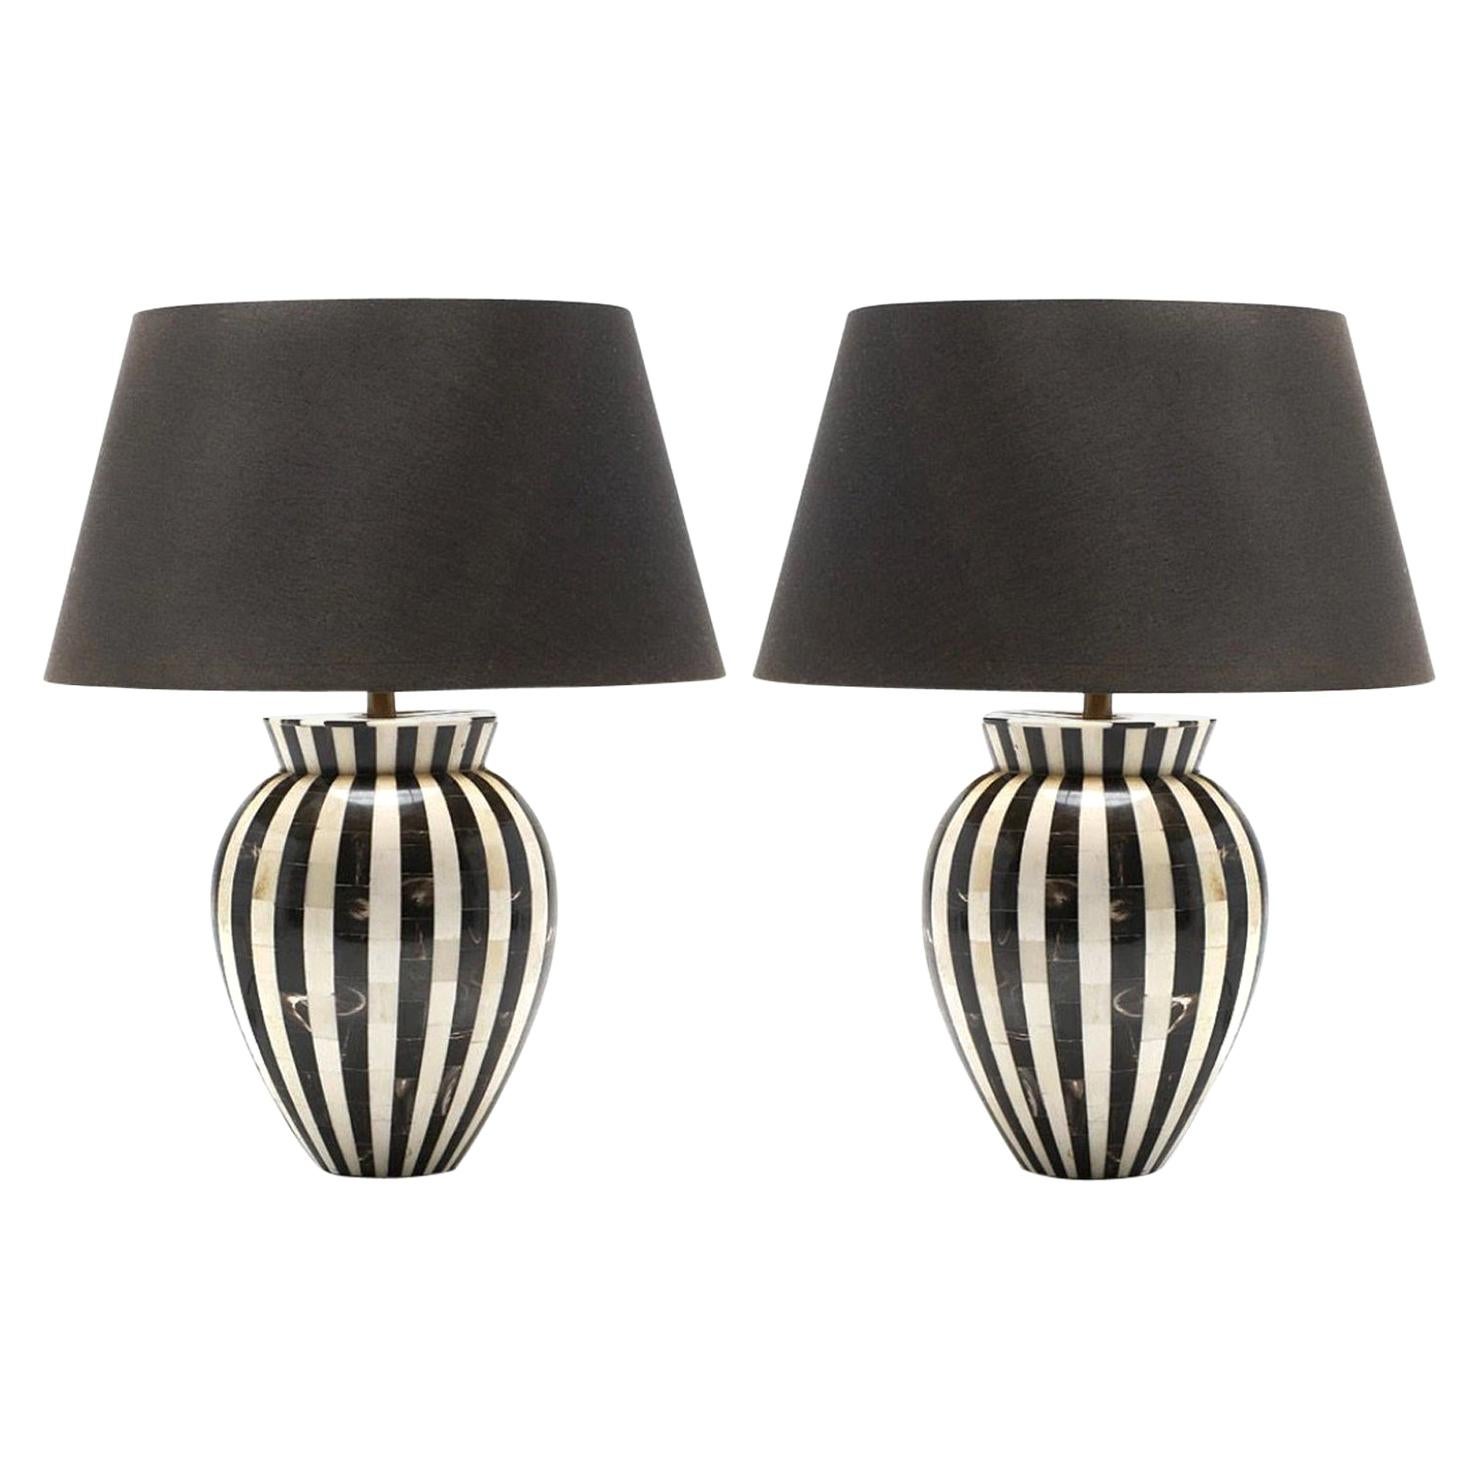 MCModern Horn and Bone Striped Pair of Table Lamps, Stunning For Sale